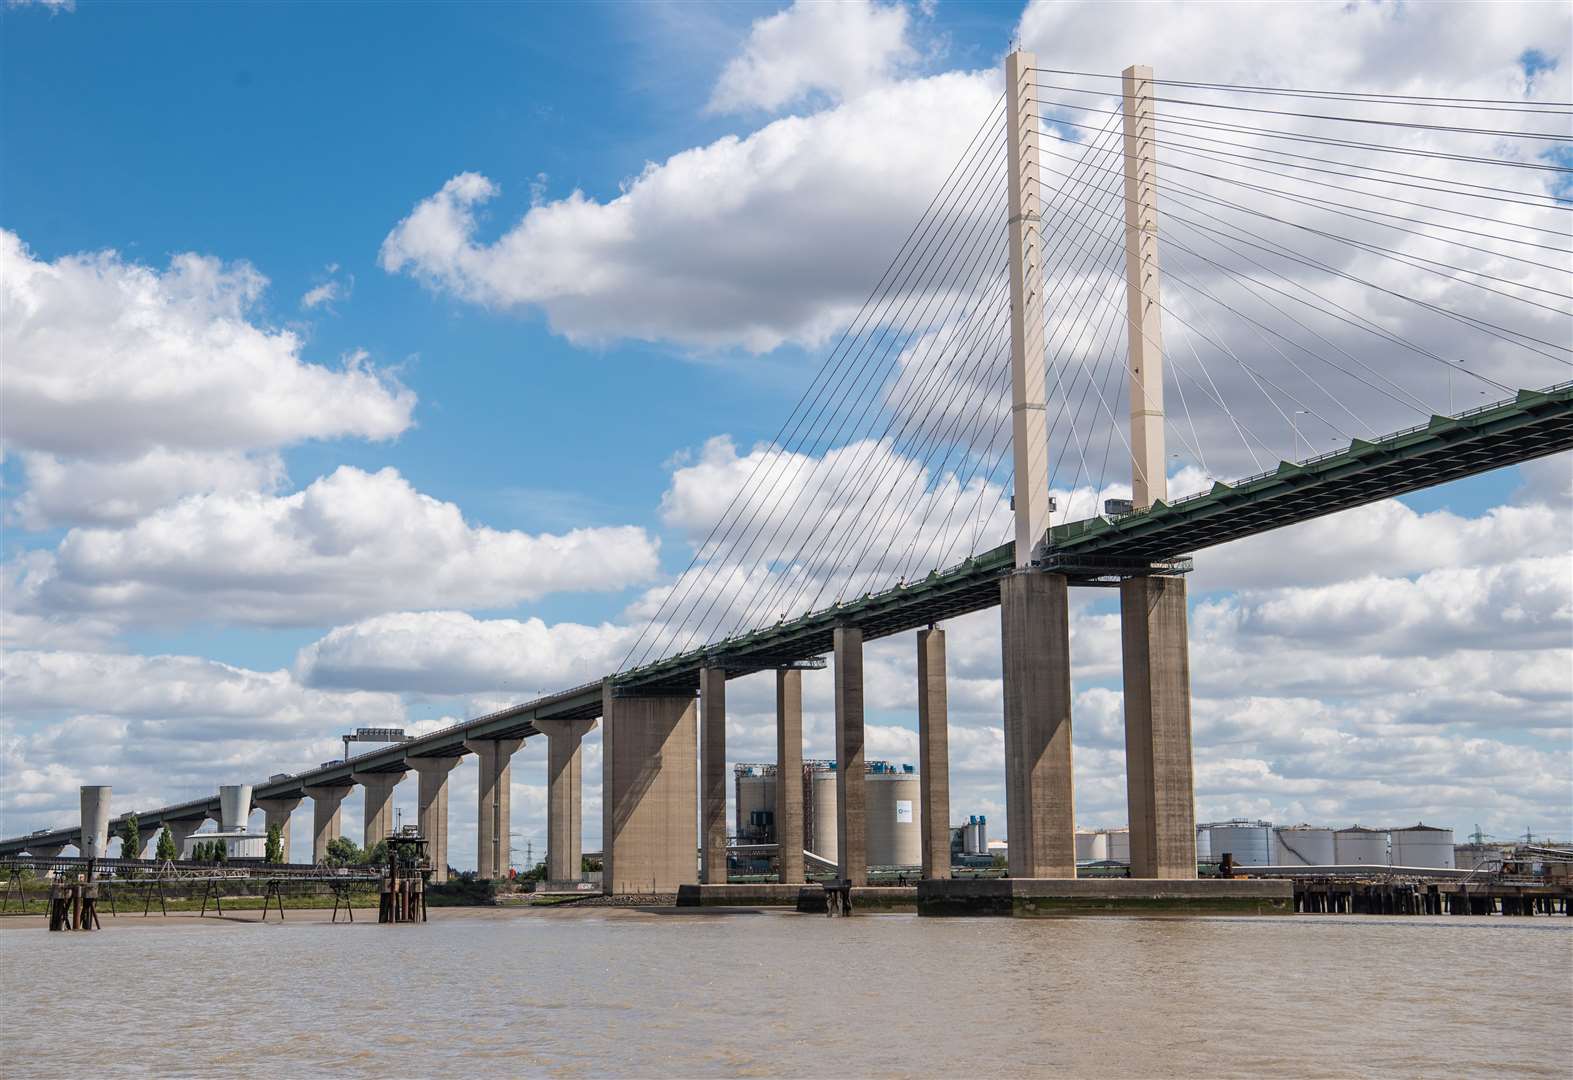 Work has started on a £10m project to repaint the Dartford Bridge. Photo: Matt Crossick/PA Wire.